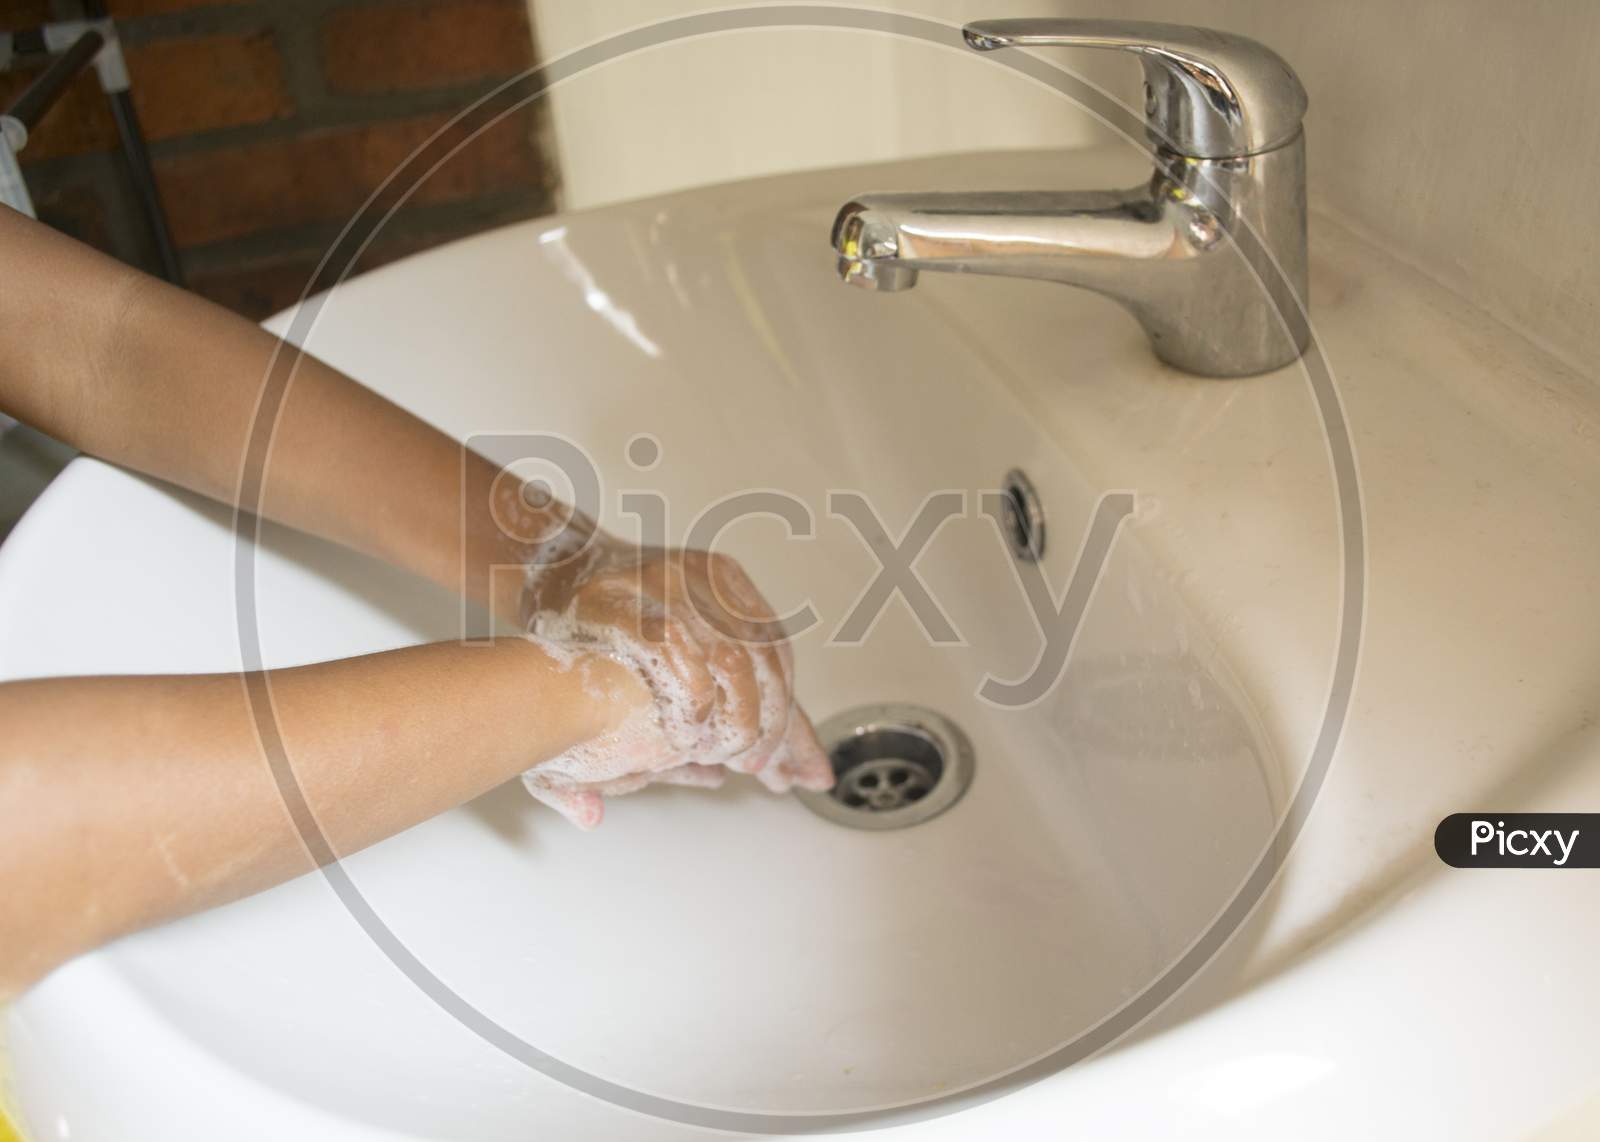 Washing Hands With Foamy Hand Soap Up To The Arm Over The Sink